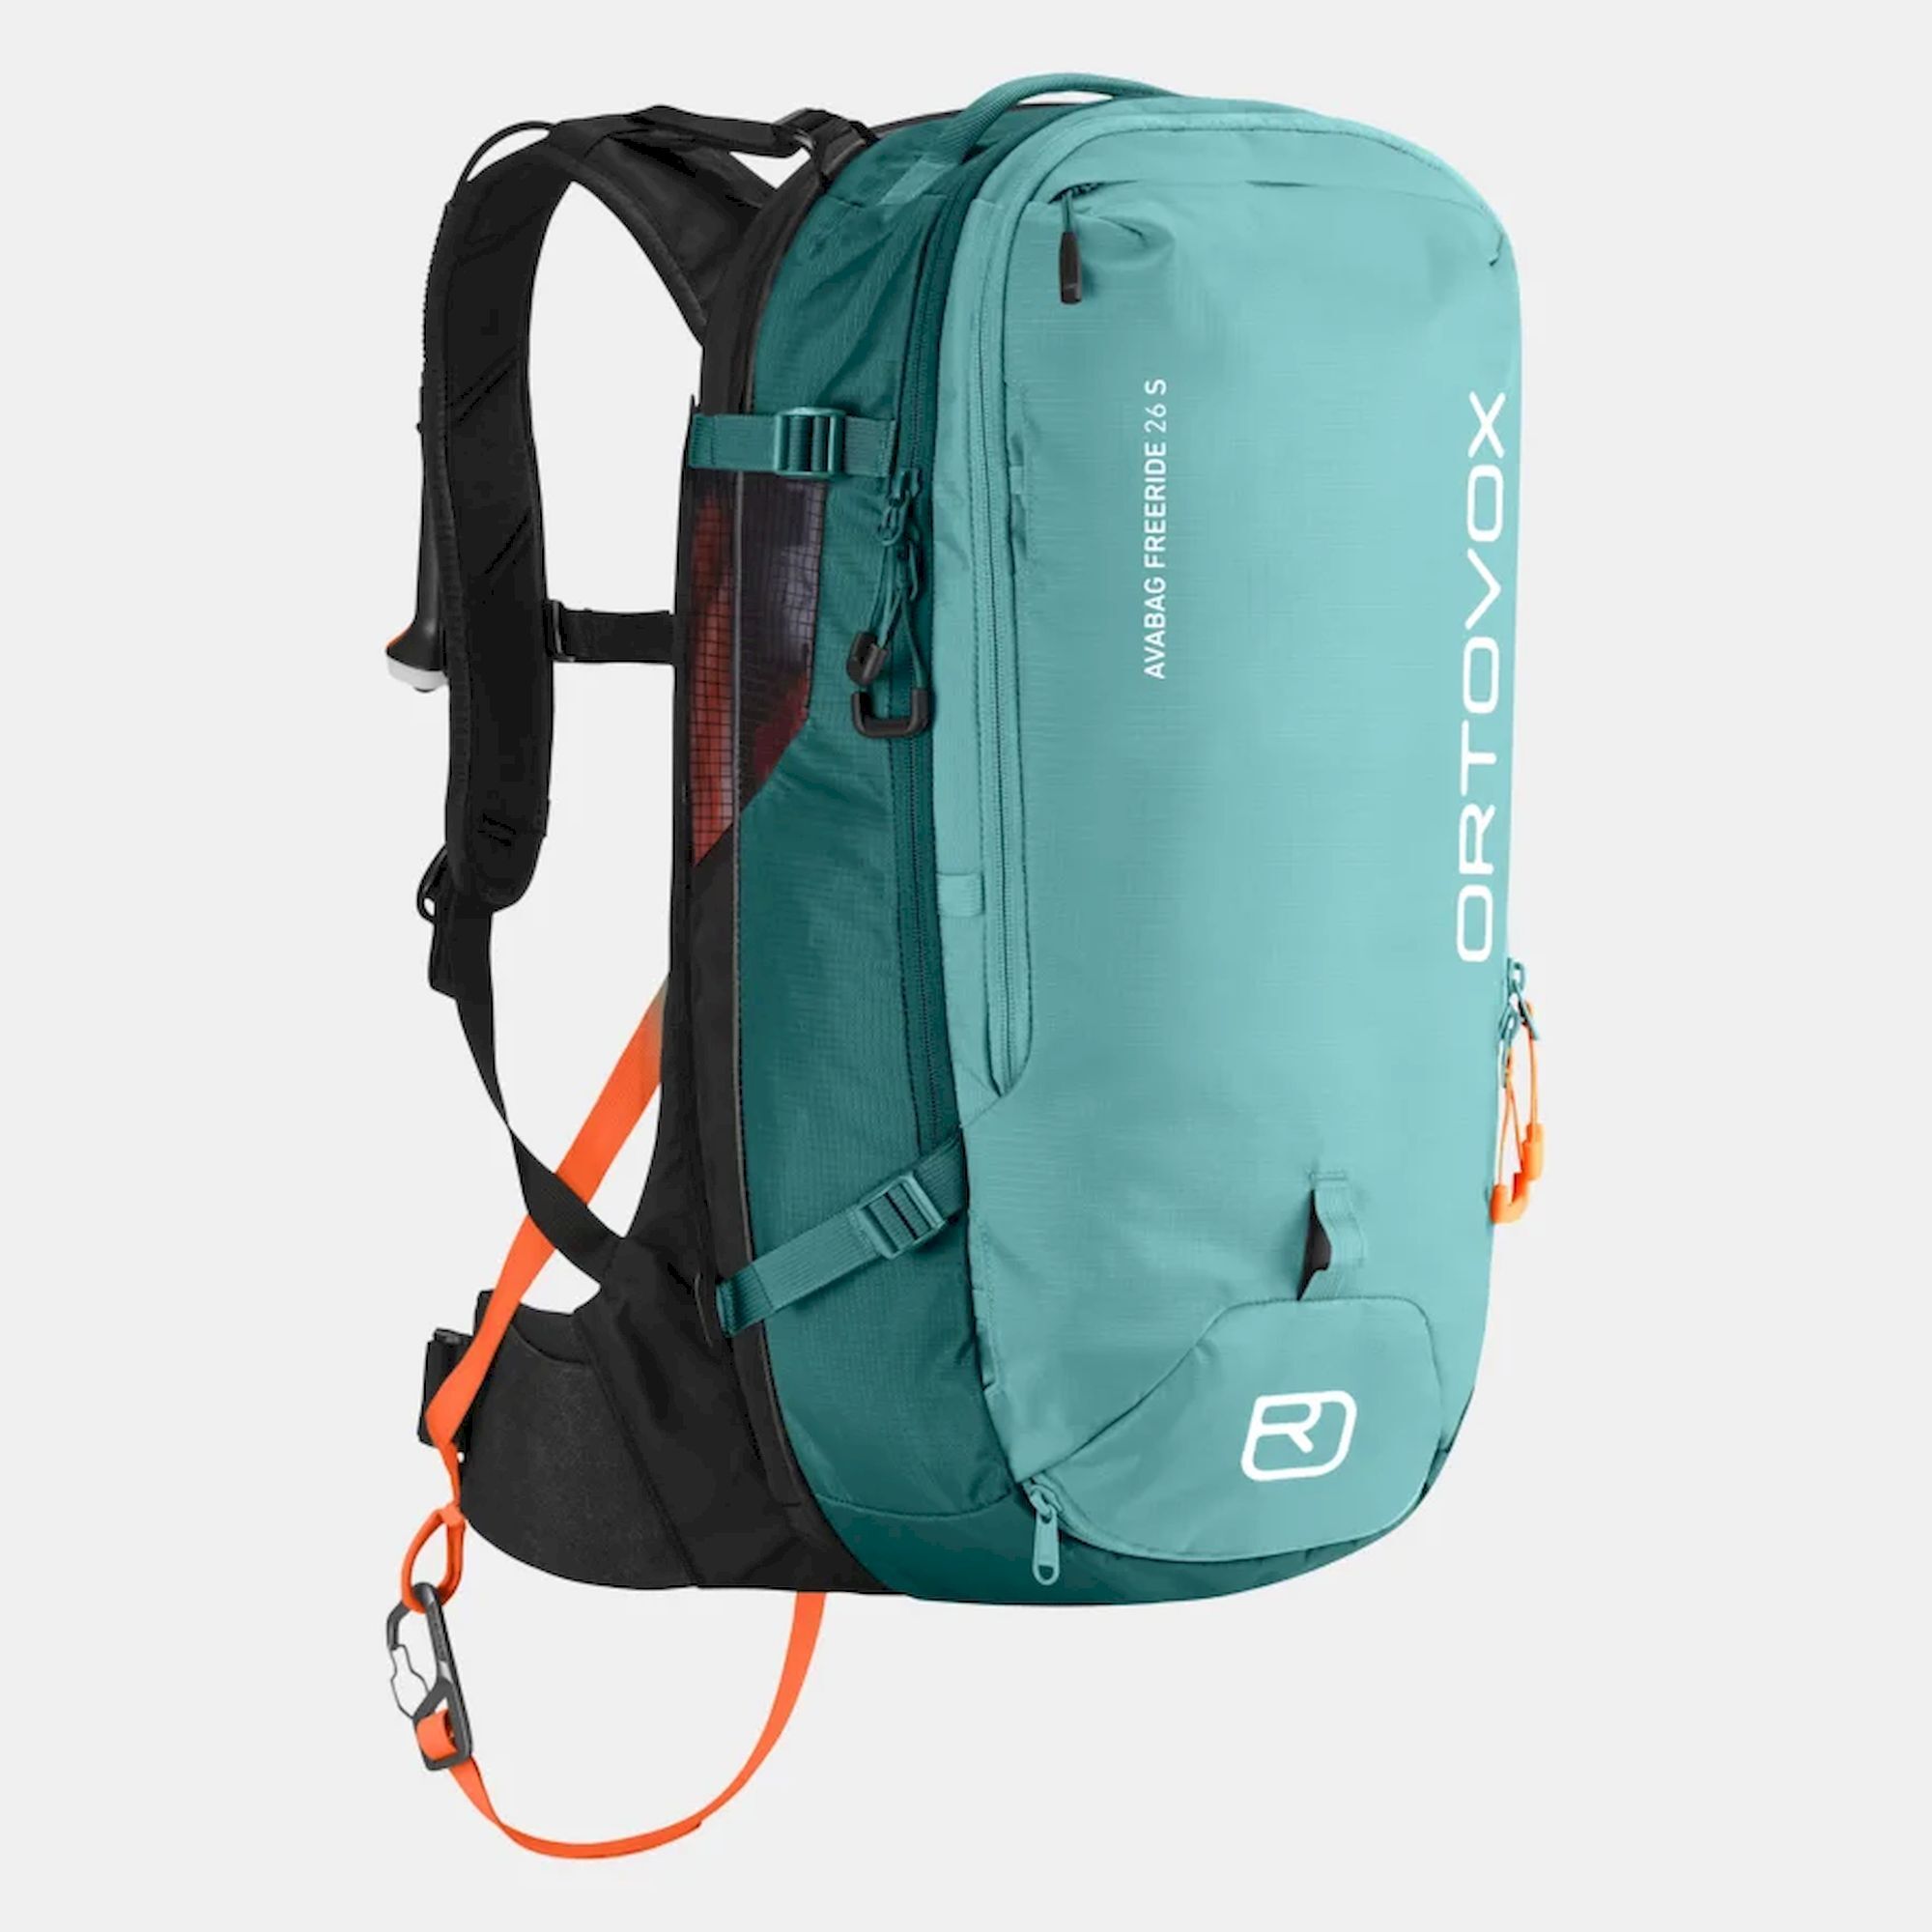 Ortovox Avabag Litric Freeride 26S - Avalanche airbag backpack